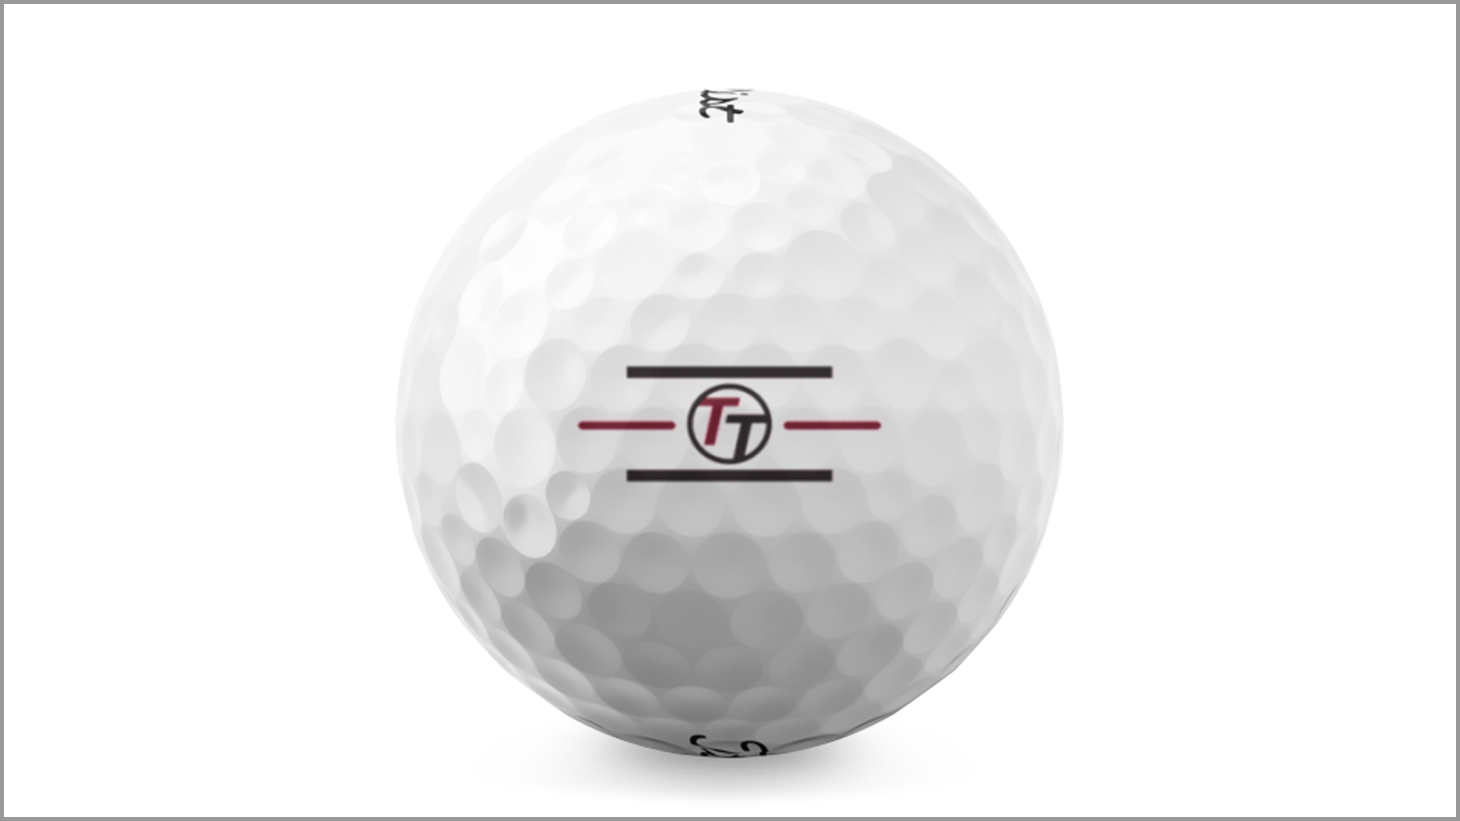 One of the custom alignment logo options available at Titleist.com